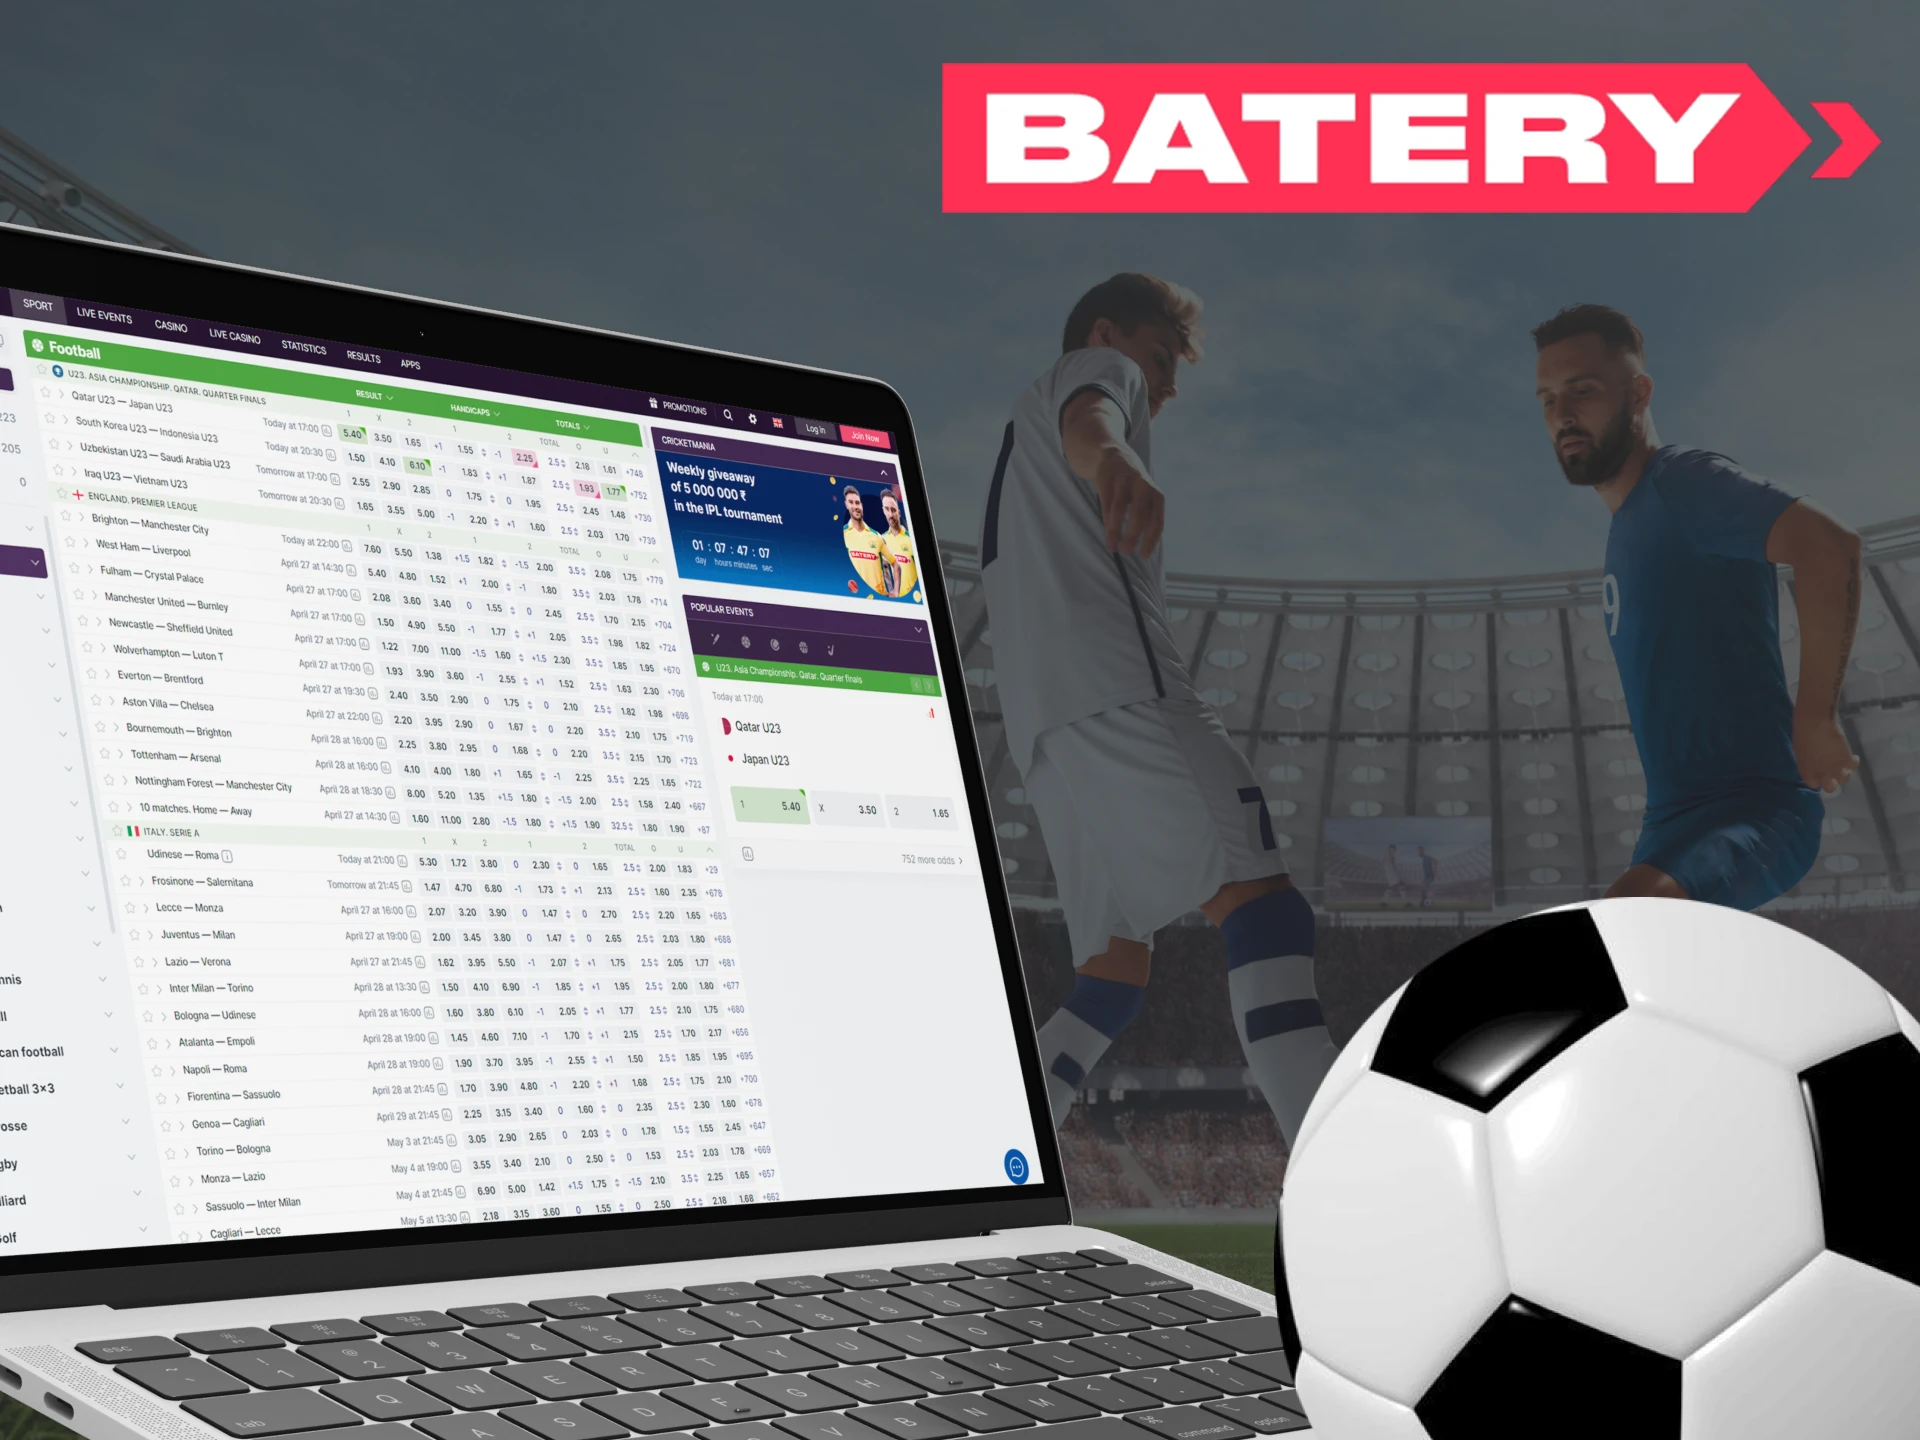 Place your bet on football at Batery Casino.